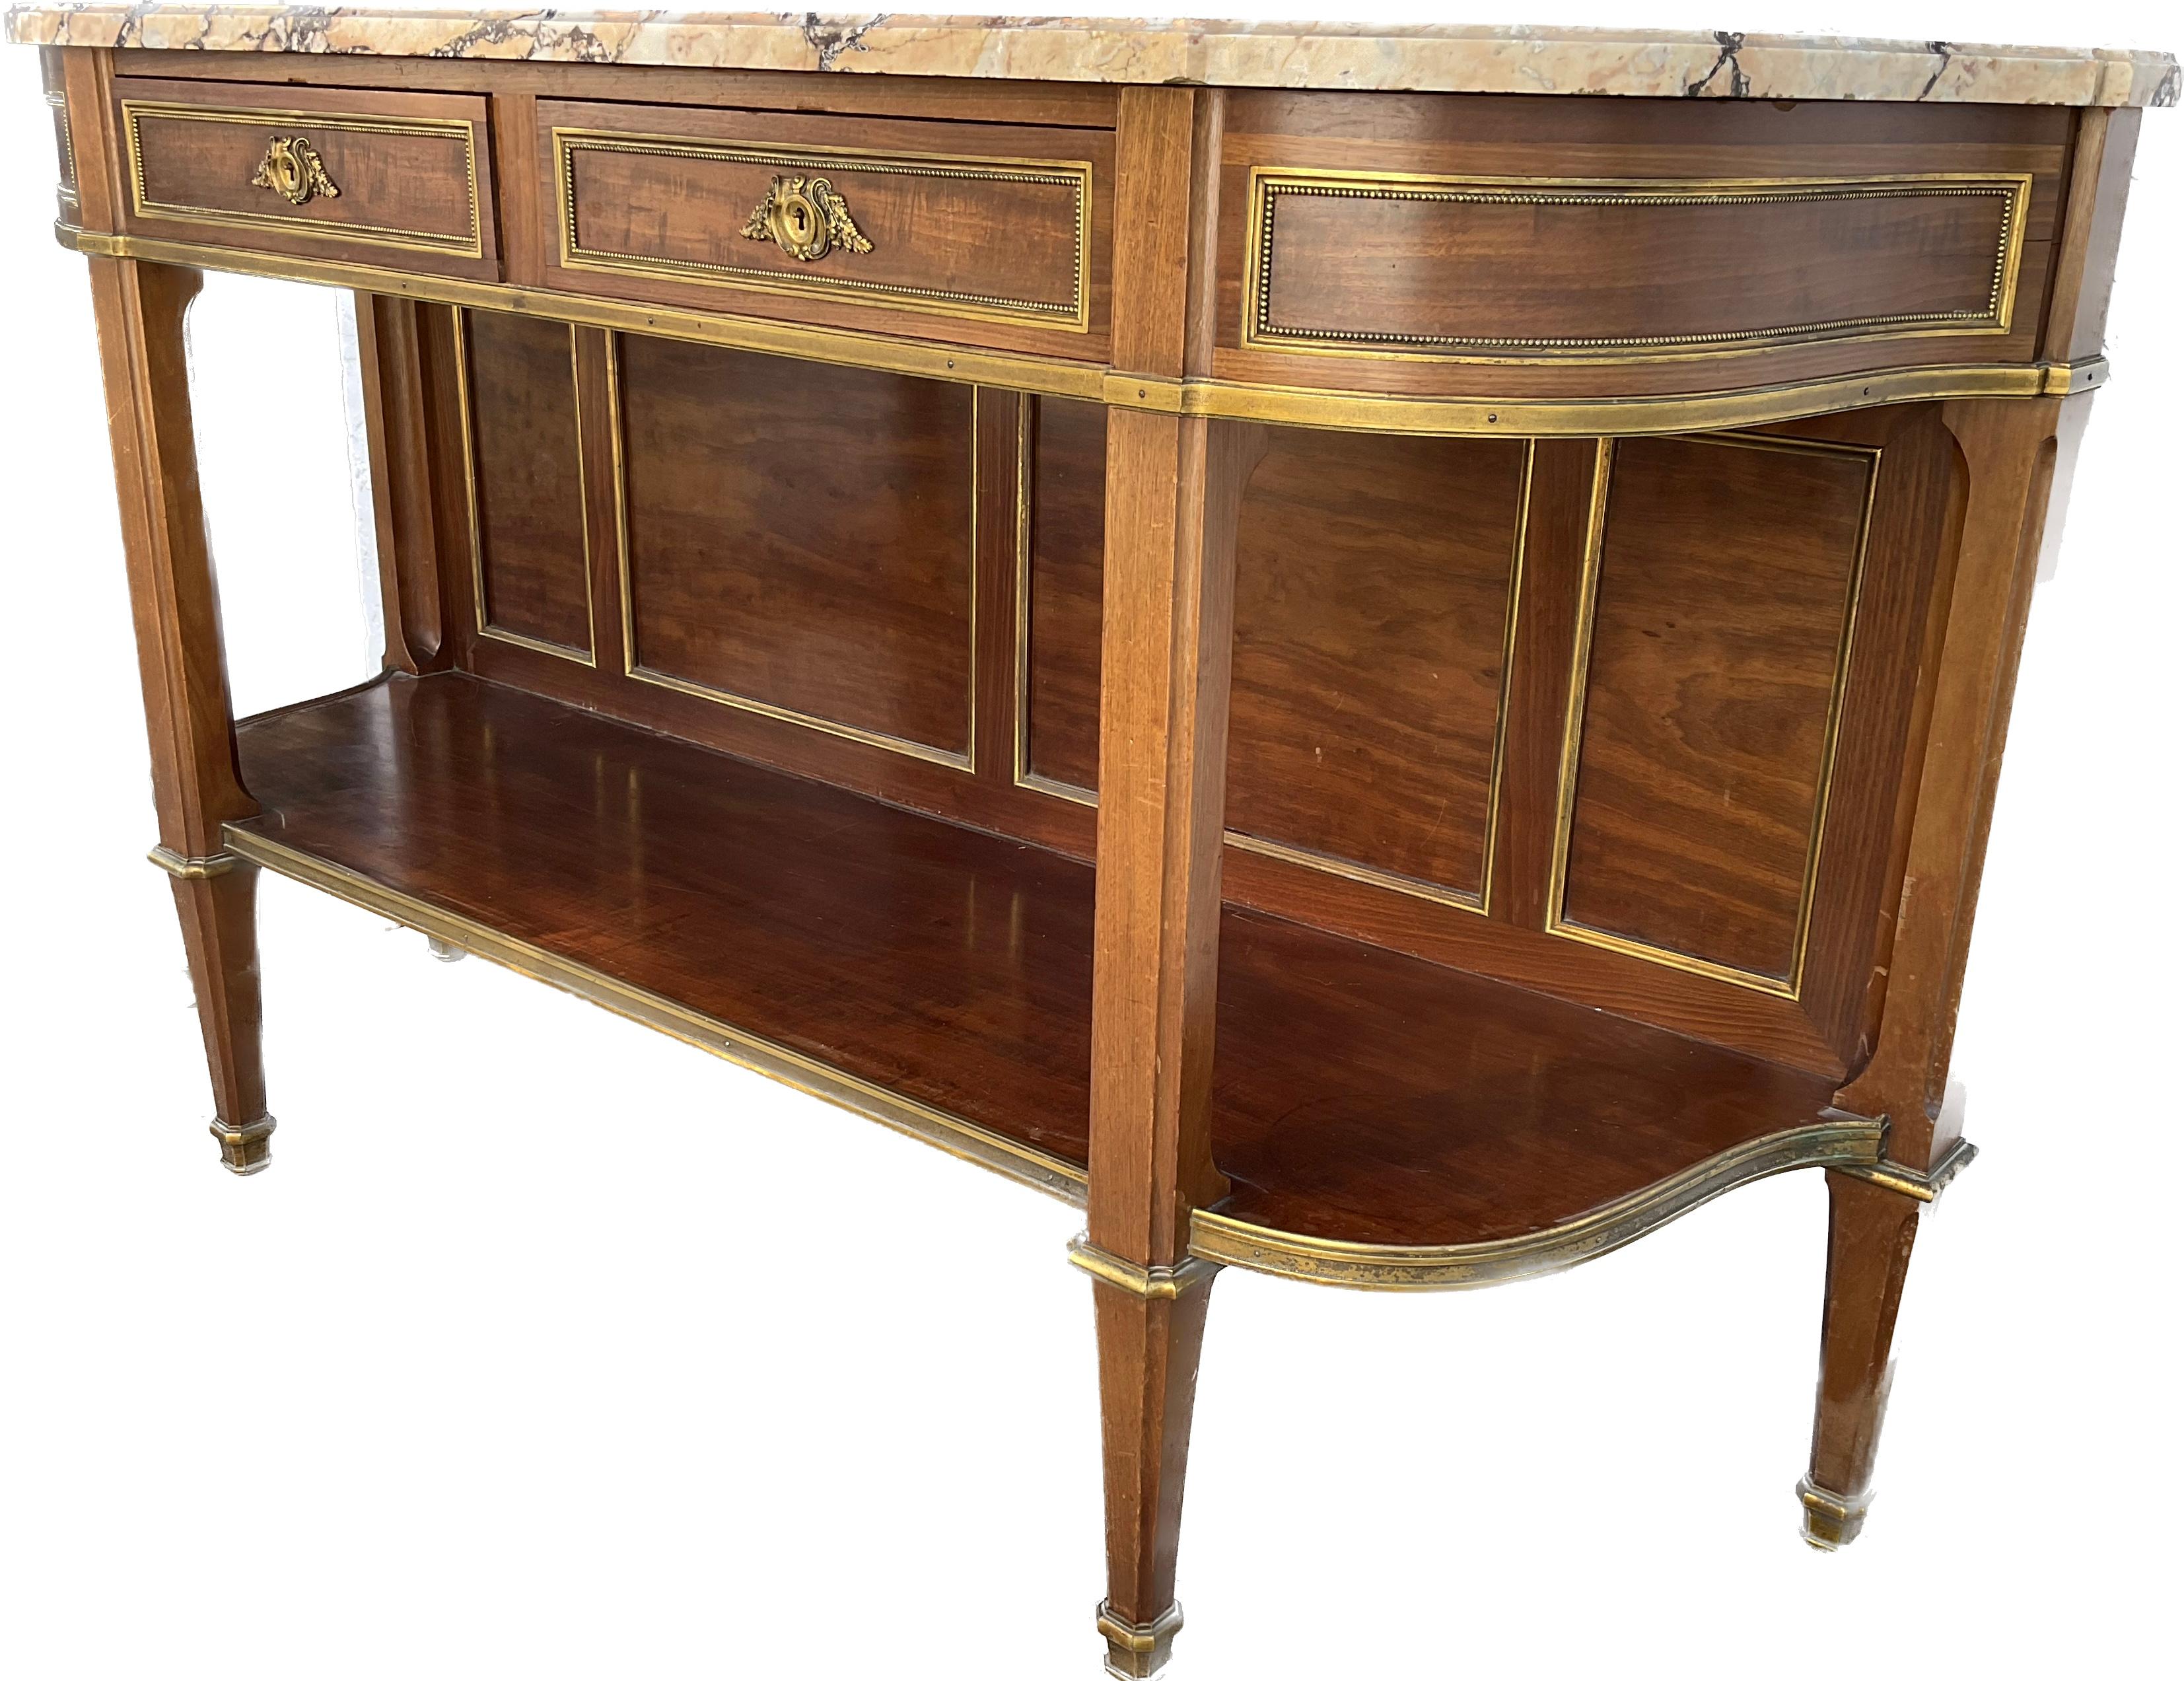 19th Century French Louis XVI Marble Top and Bronze Mounted Open Shelf Sideboard Buffet For Sale